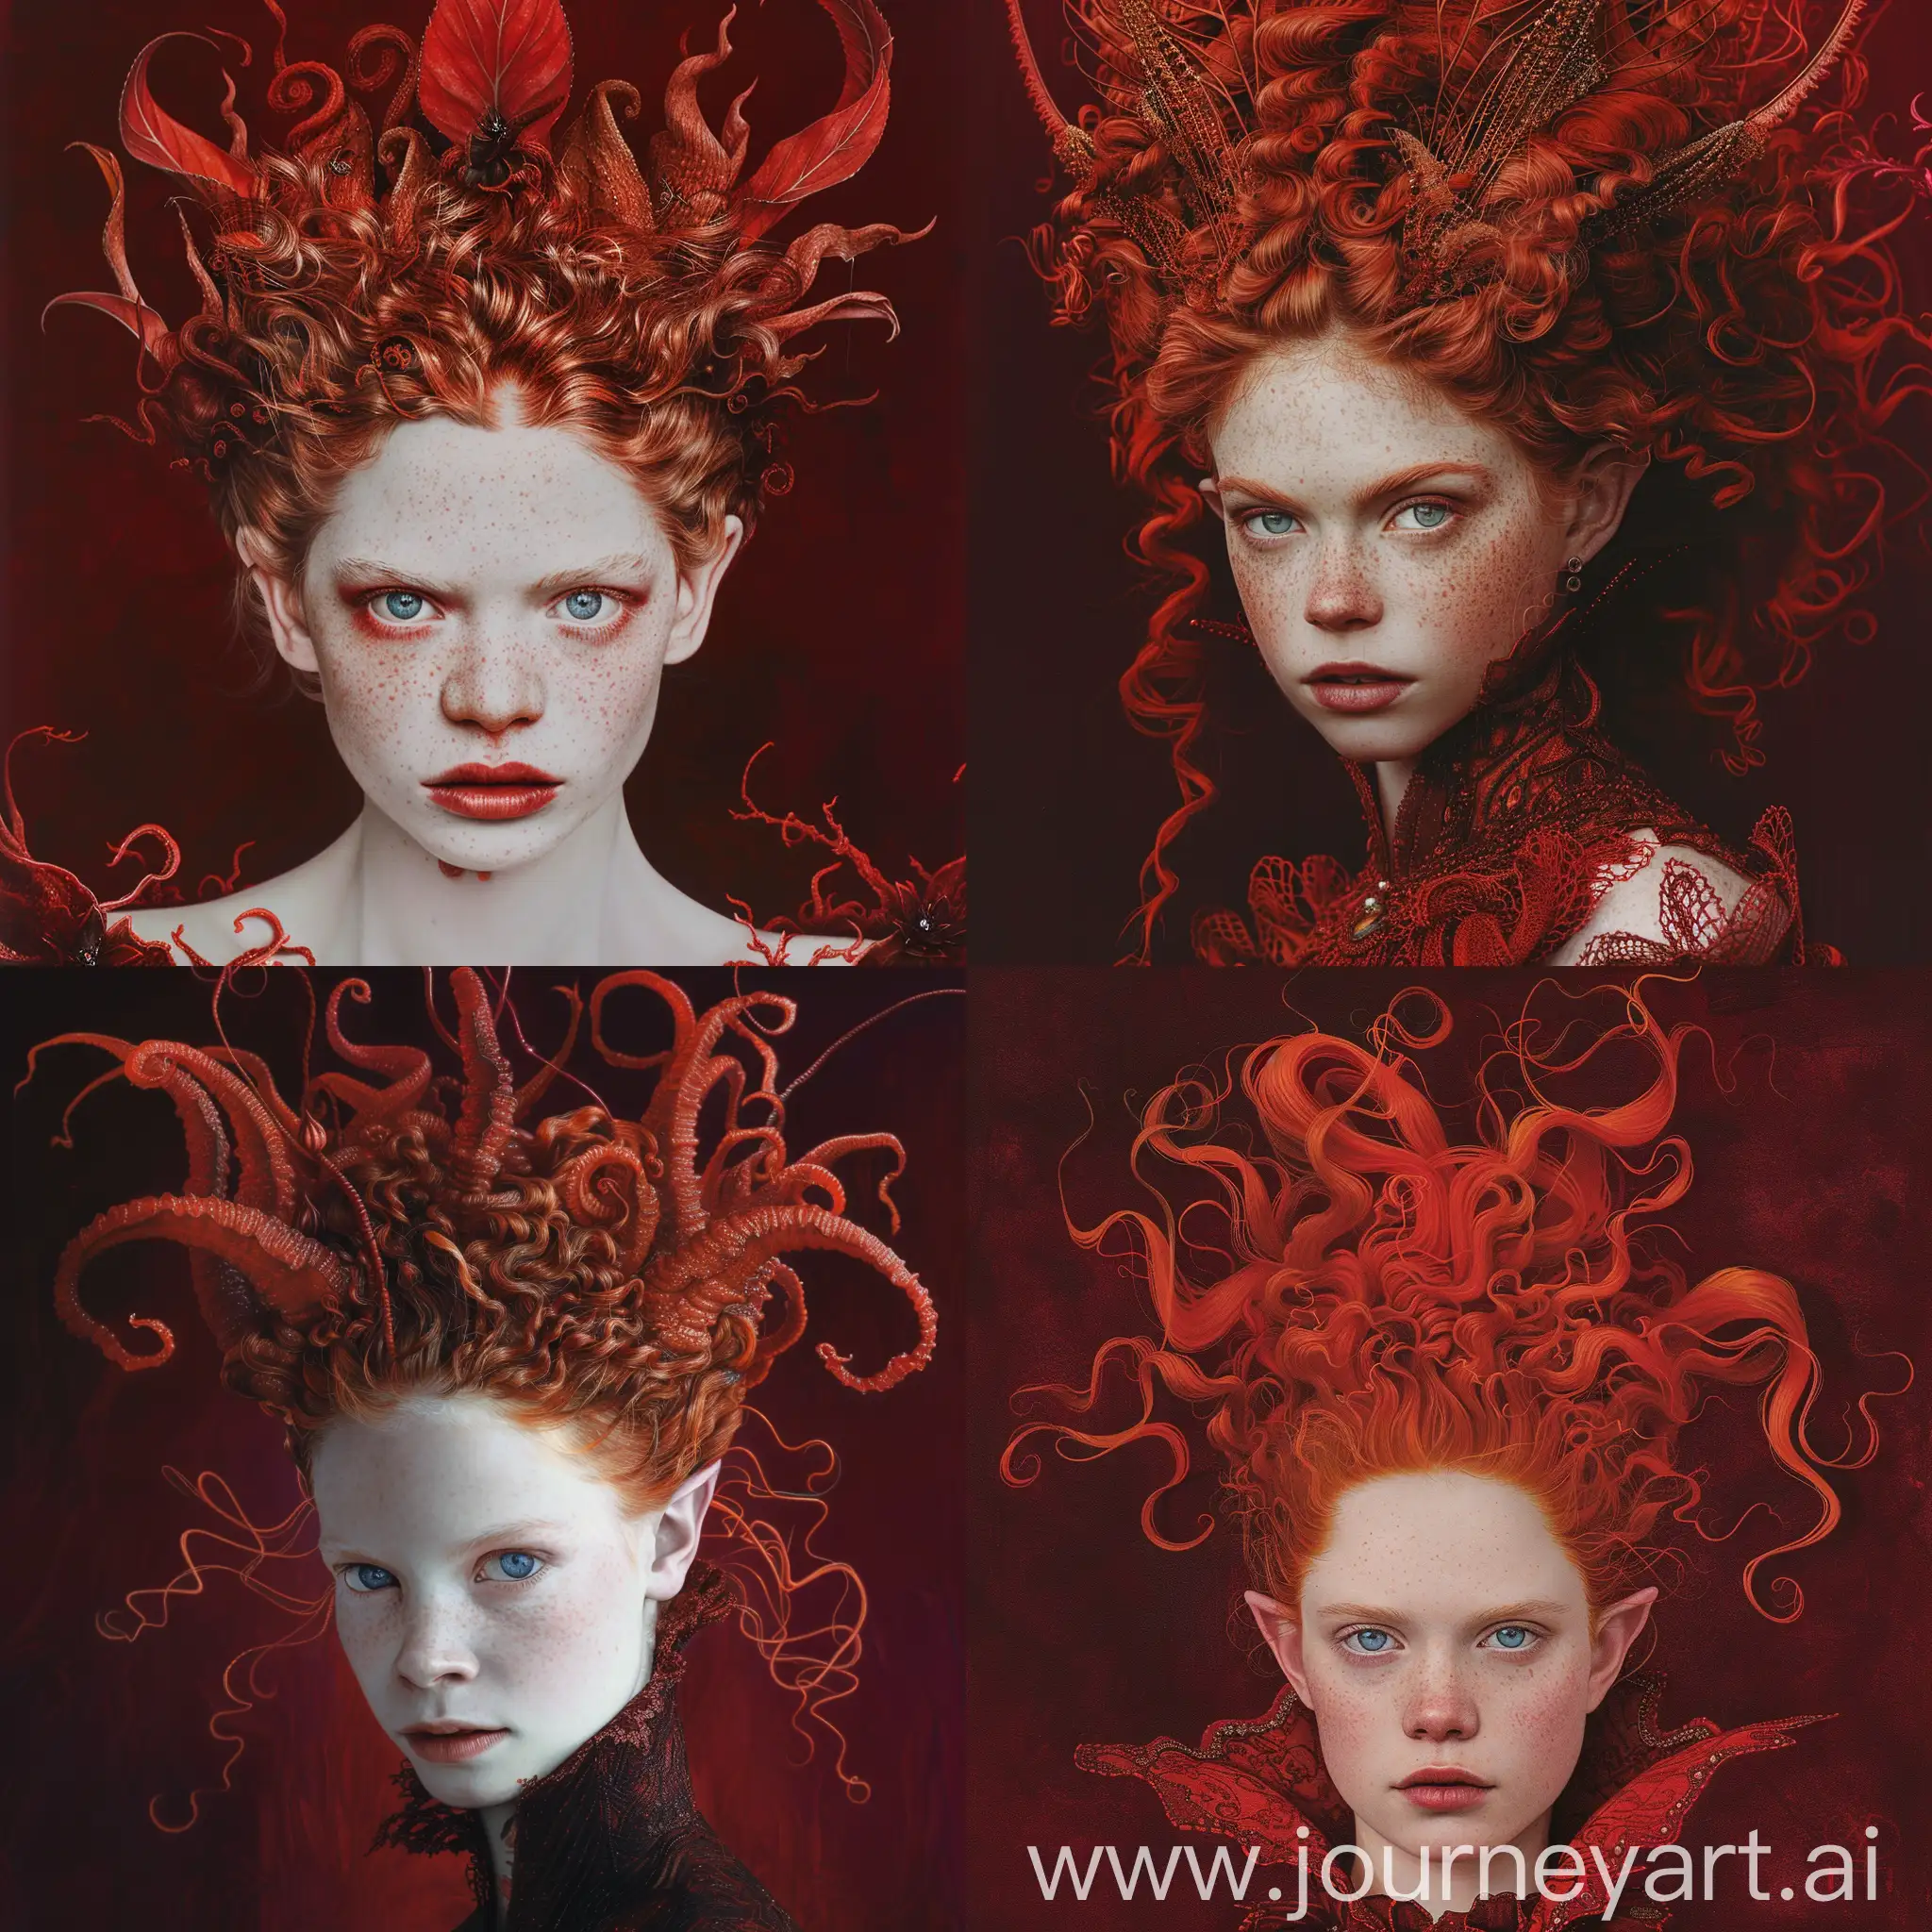 A highly detailed portrait of a young woman with pale skin, piercing blue eyes and wild, fiery red curls styled in an elaborate updo, her expression one of regal power and determination, set against a deep crimson background --v 6.0